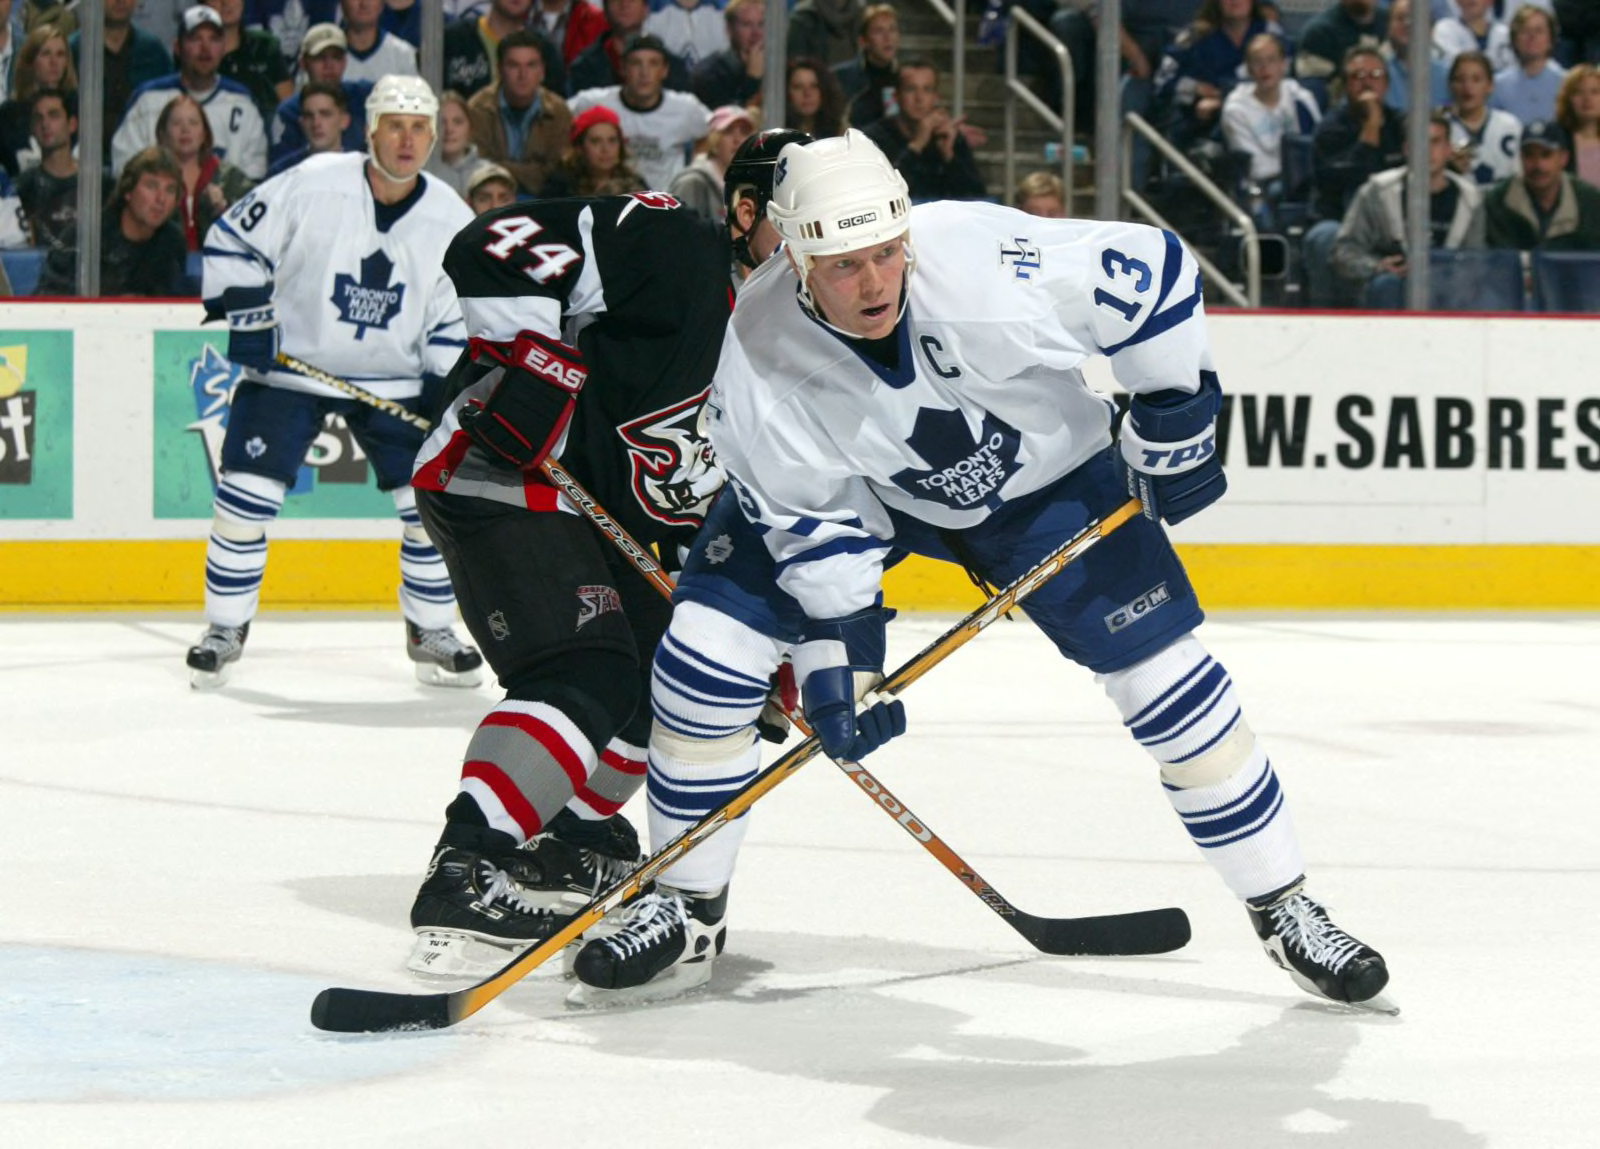 I think every Leafs fan remembers this moment. Mats Sundin's 500th Goal